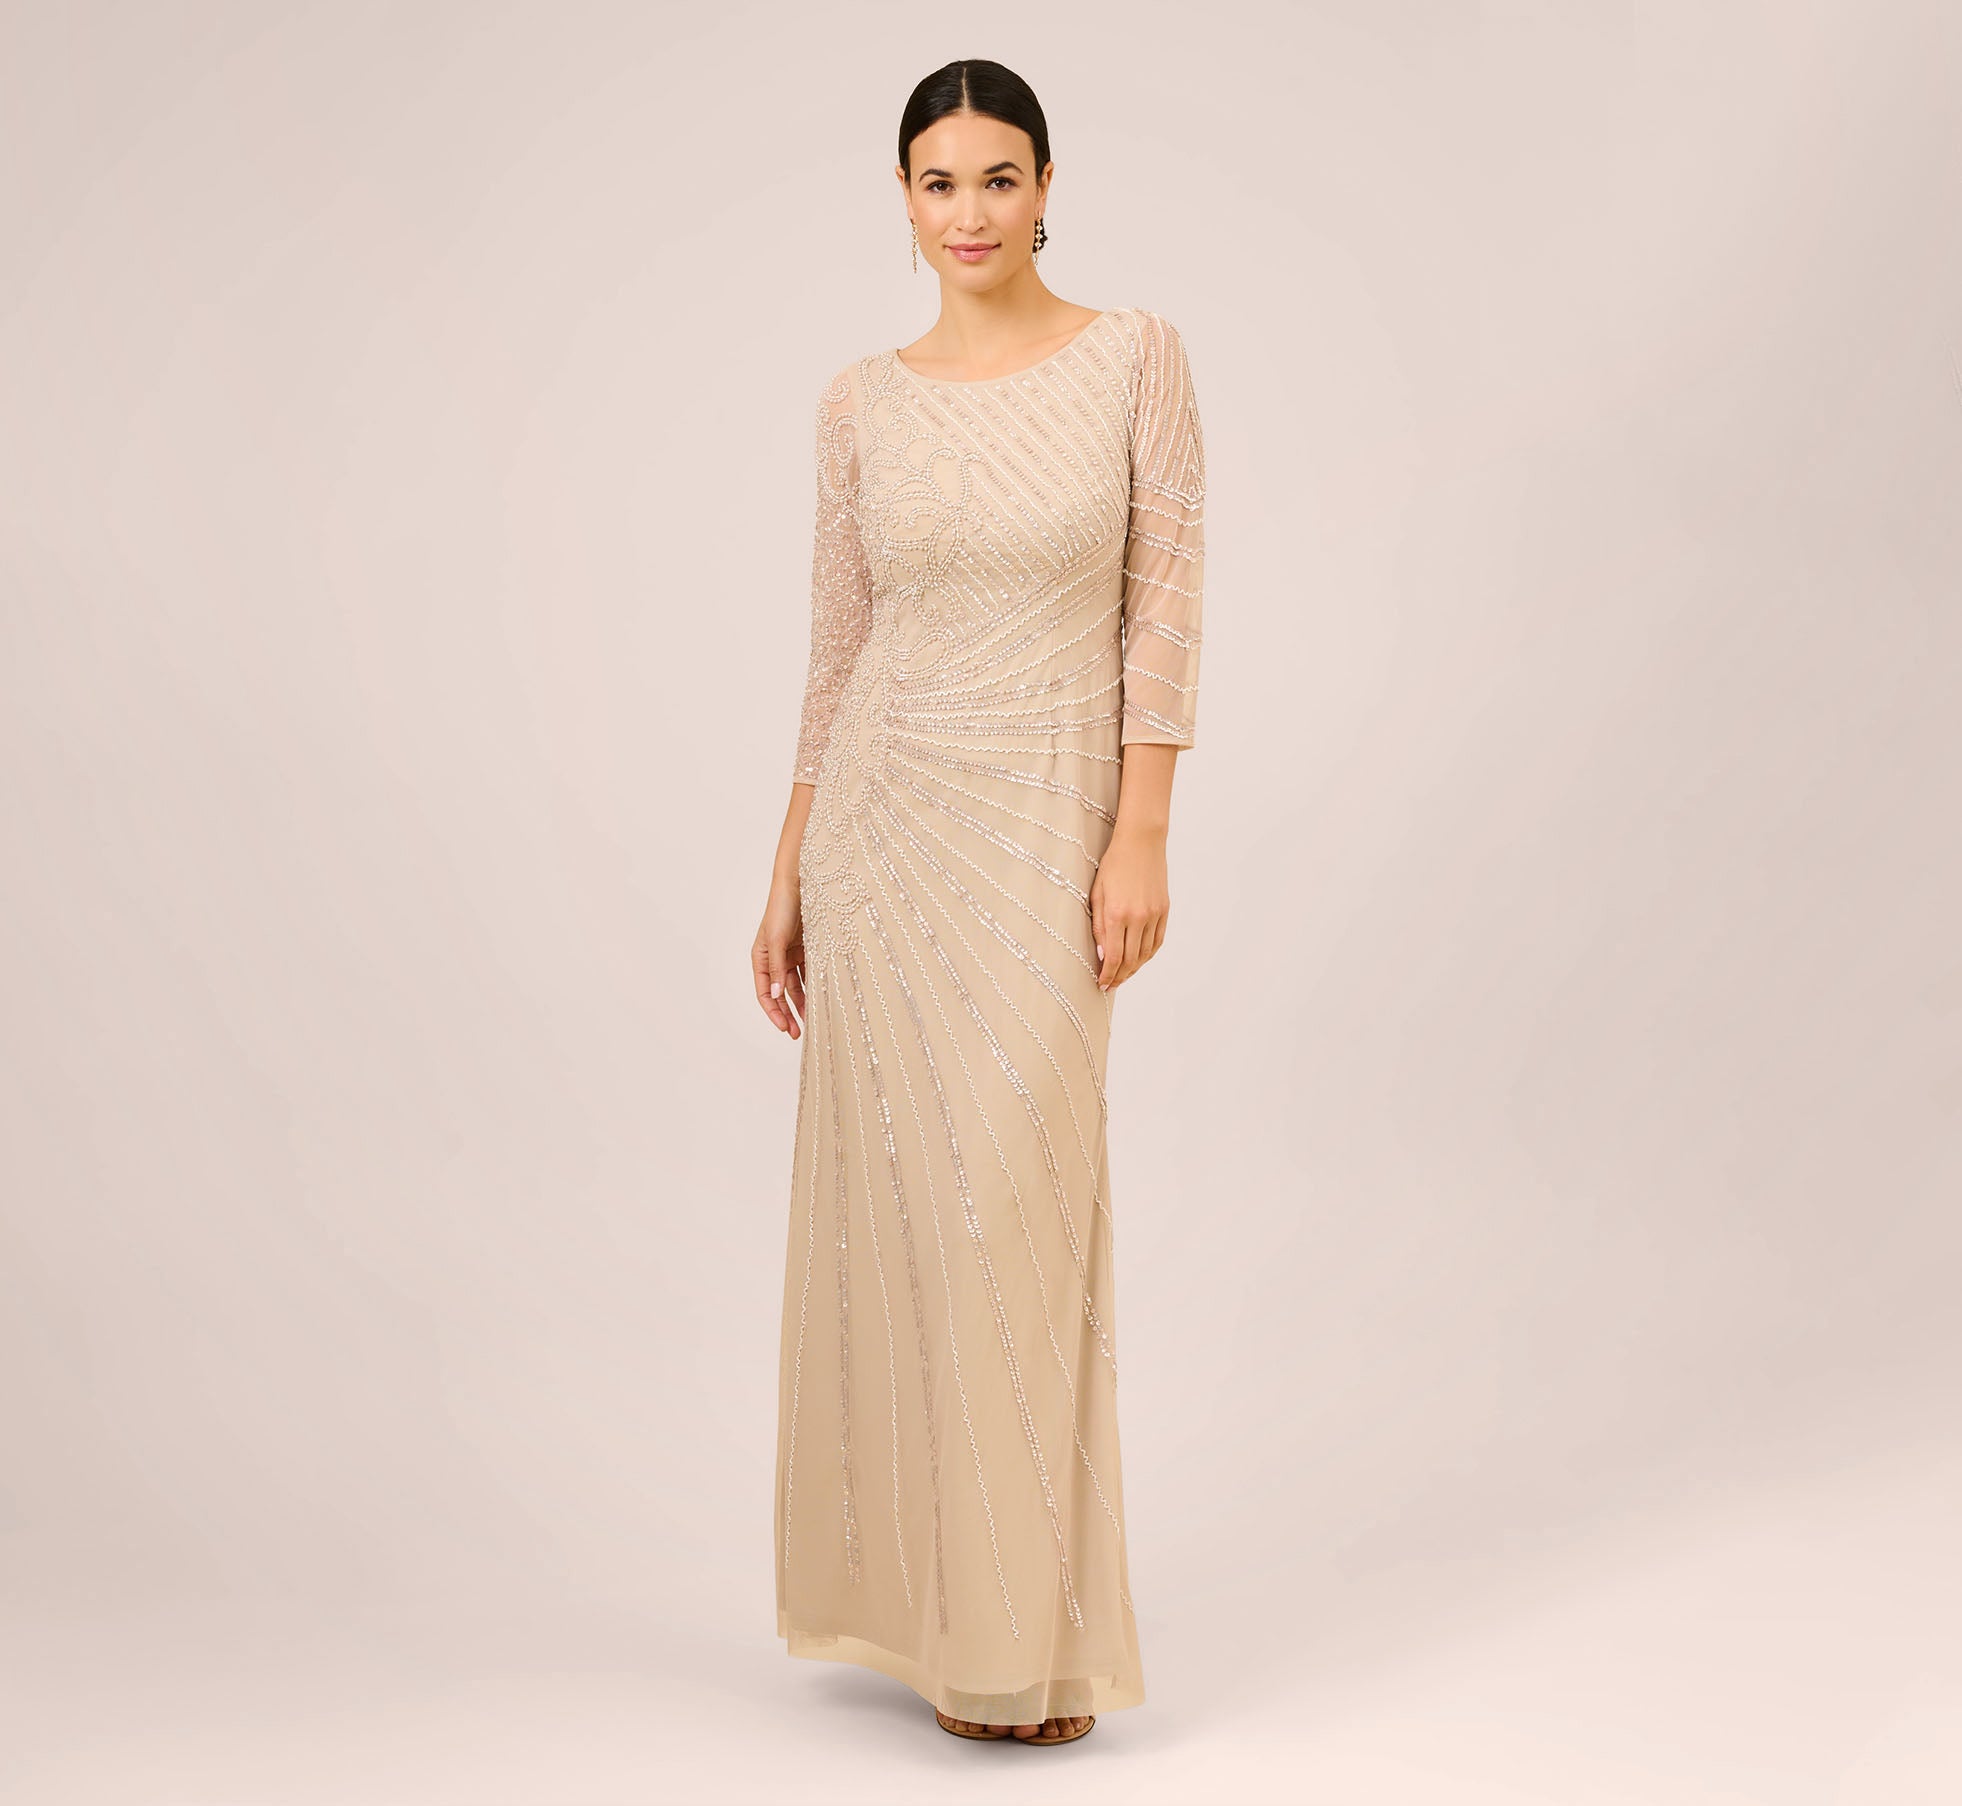 Hand-beaded Illusion Column Gown With Bell Sleeves Rose Gold